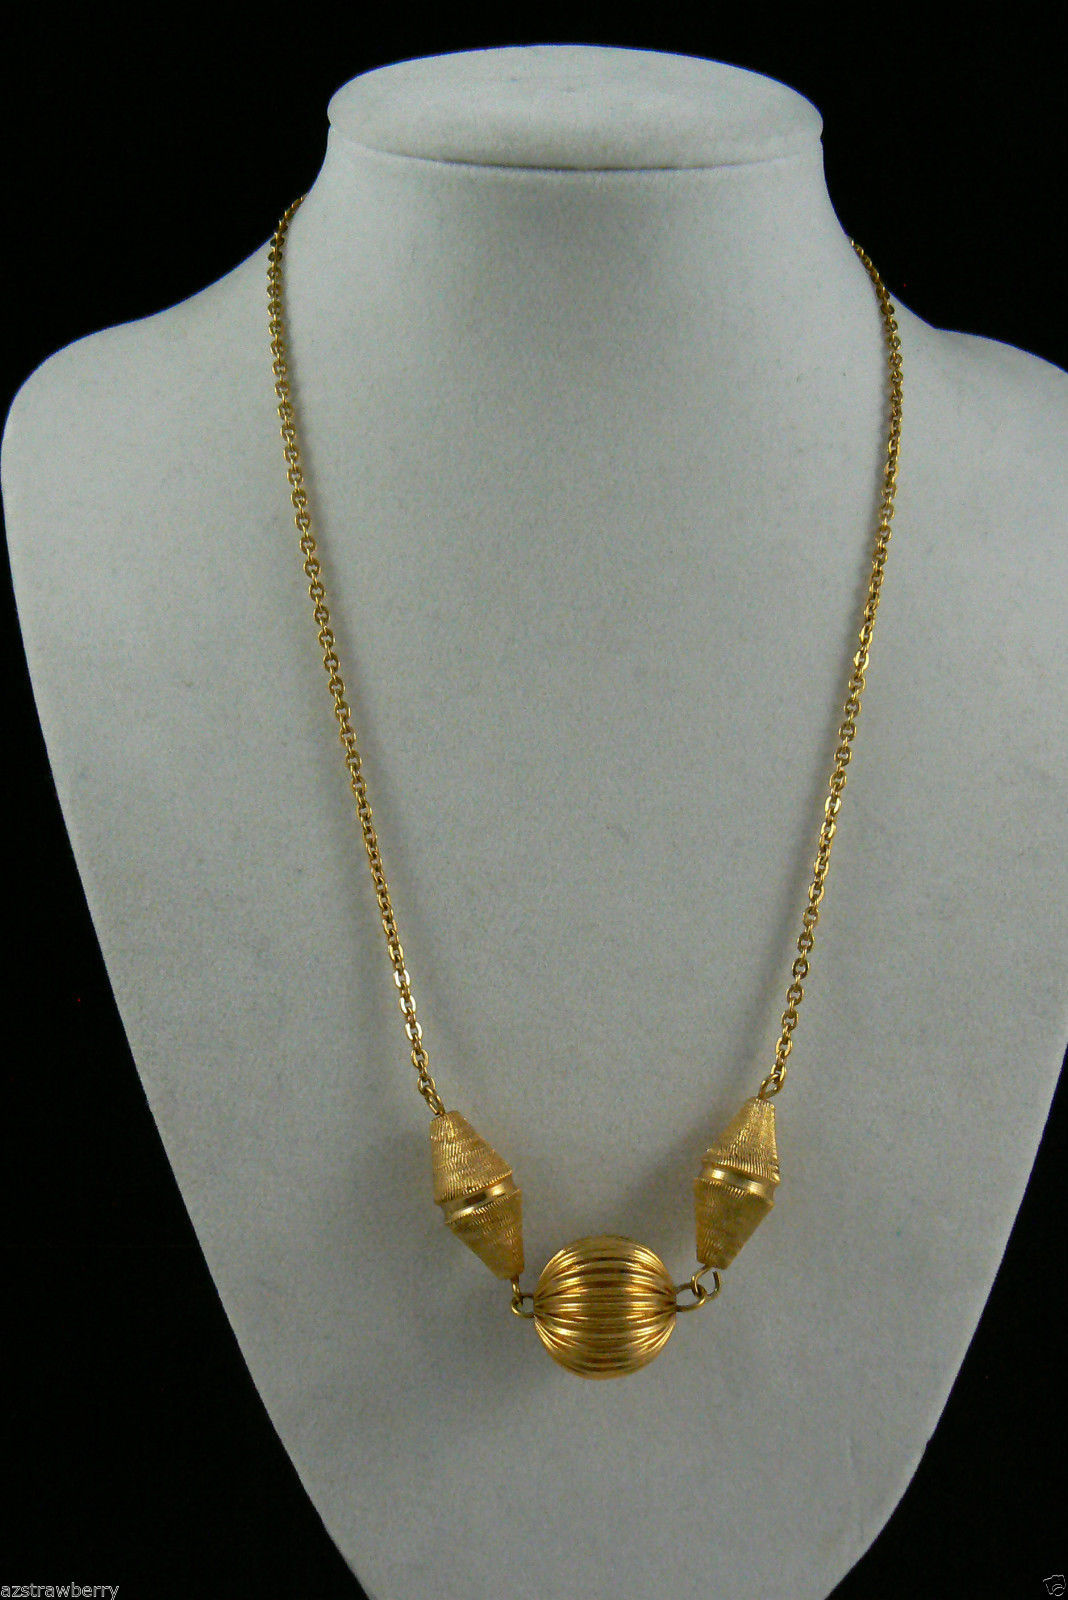 VINTAGE GOLD TONE METAL BALL PENDANT CHAIN NECKLACE 18